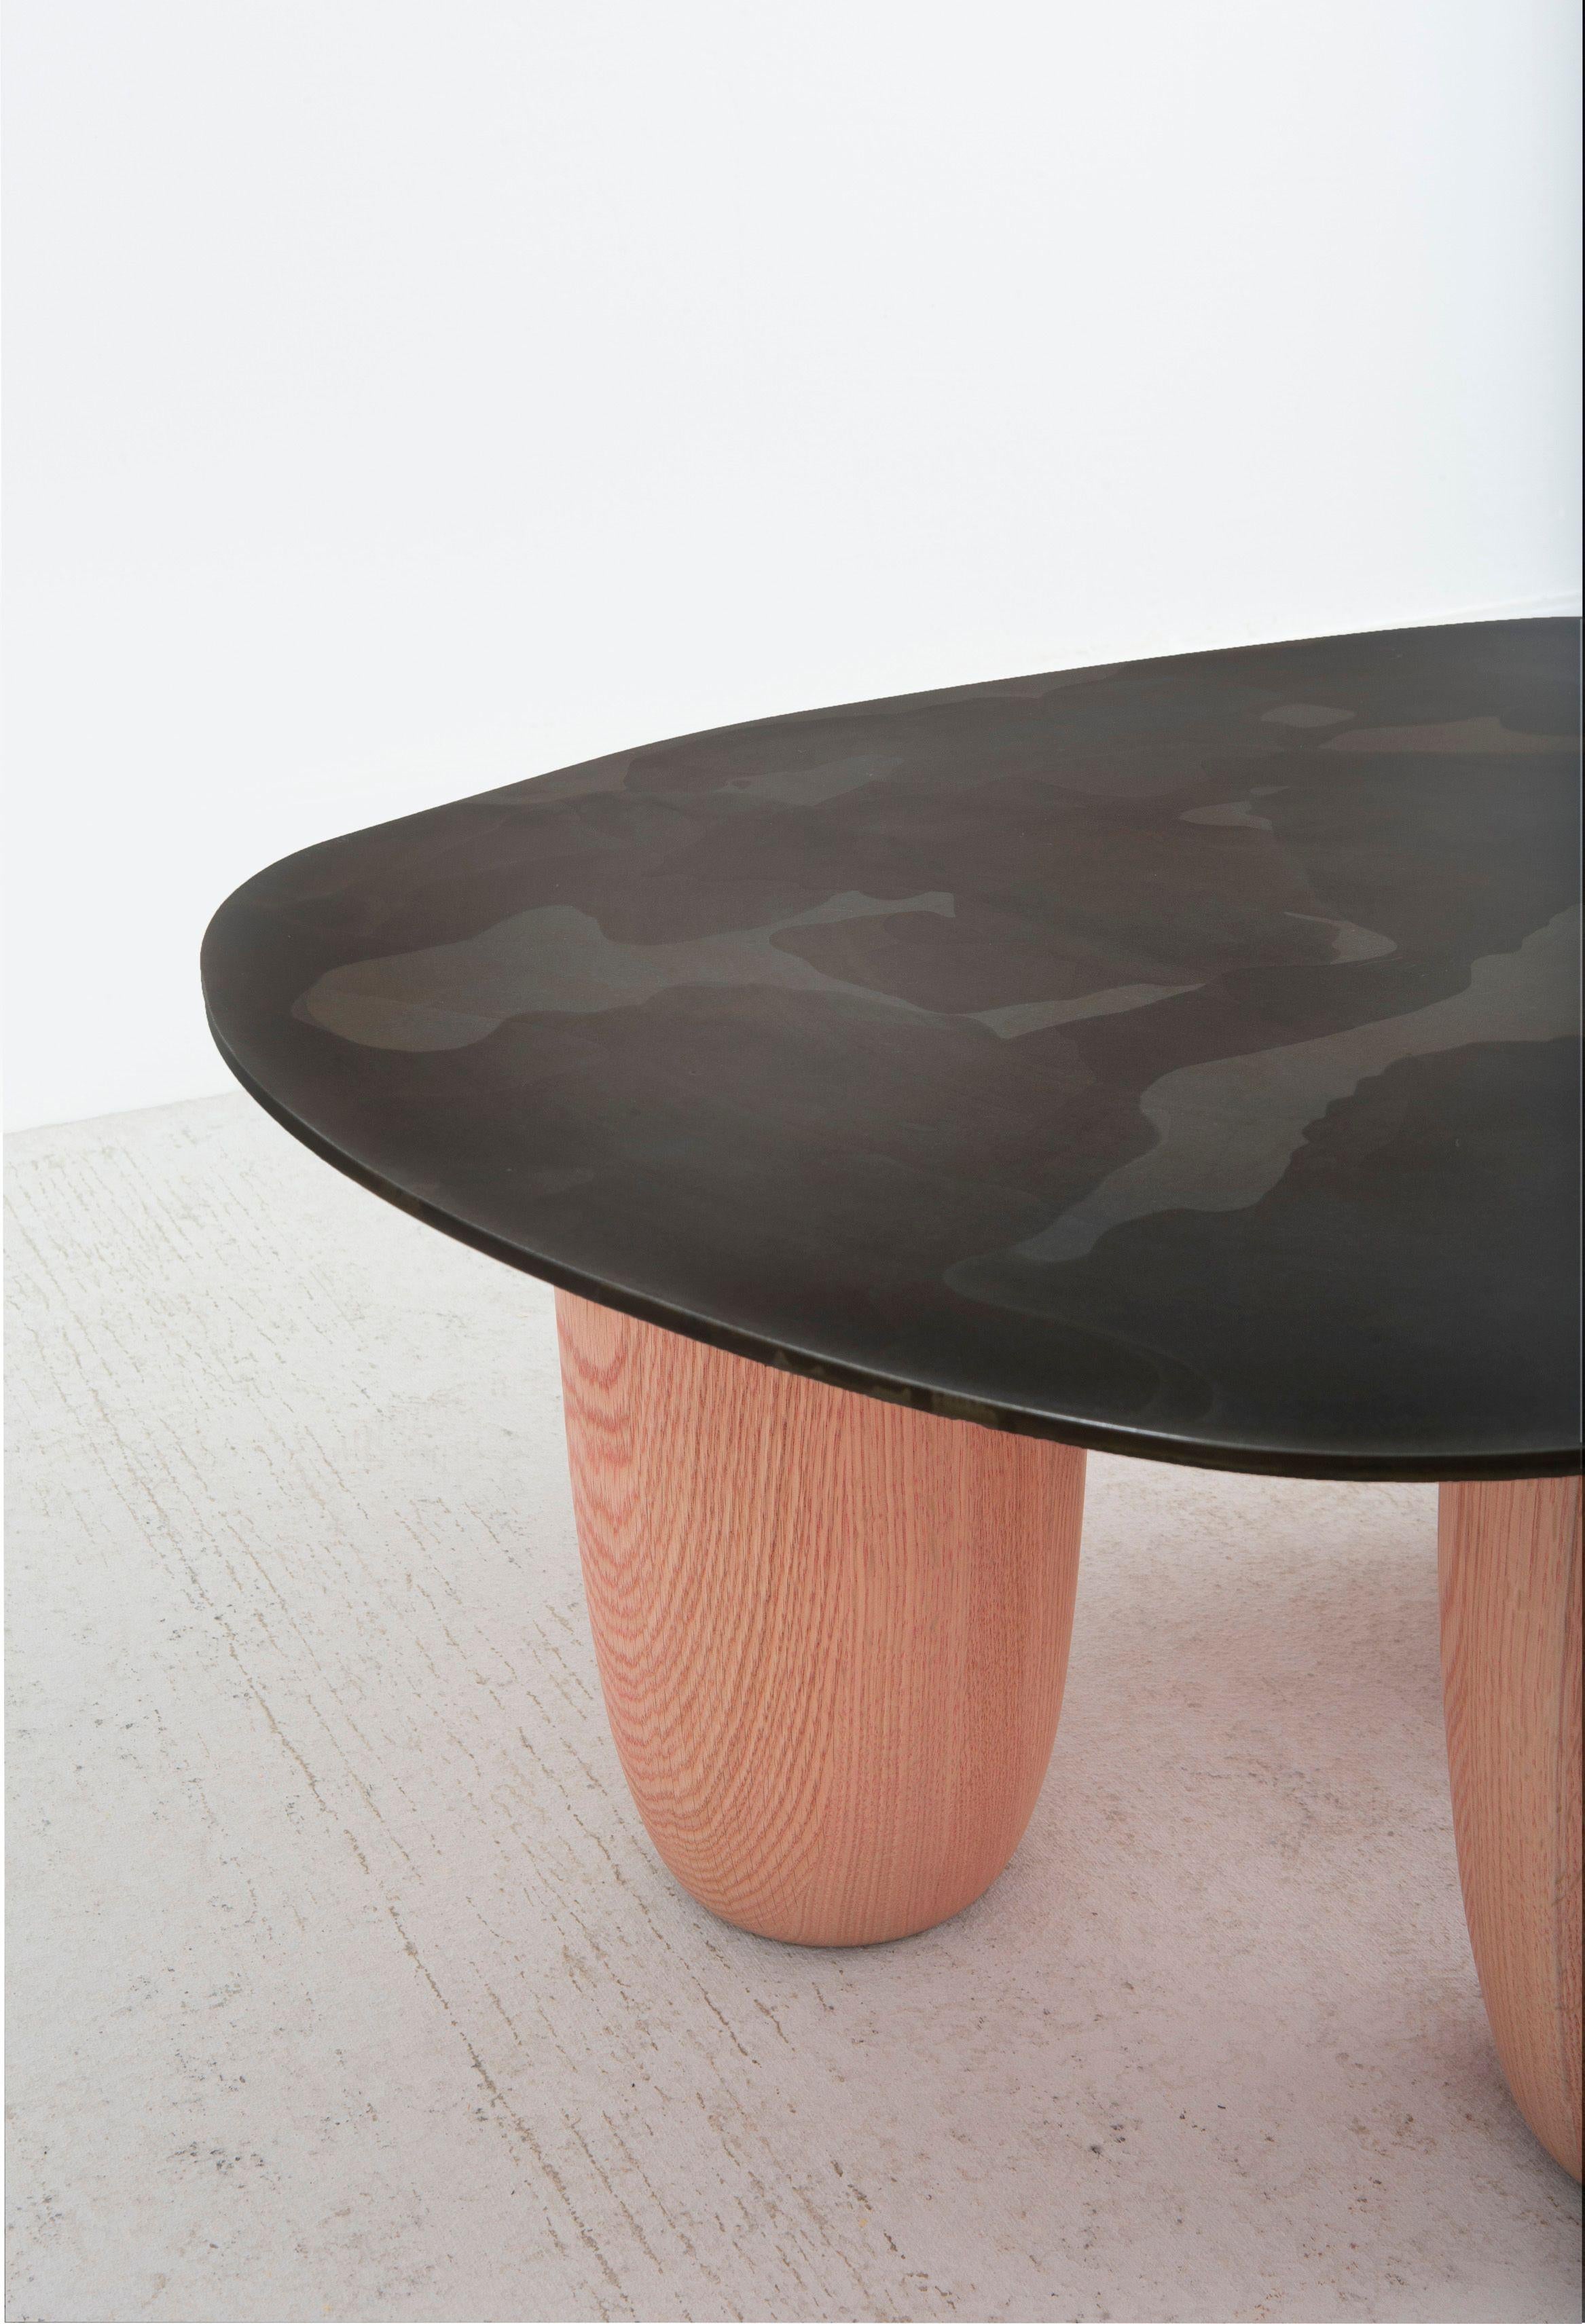 Minimalist Contemporary Patinated Steel and Solid Oak Low Tables by Vivian Carbonell